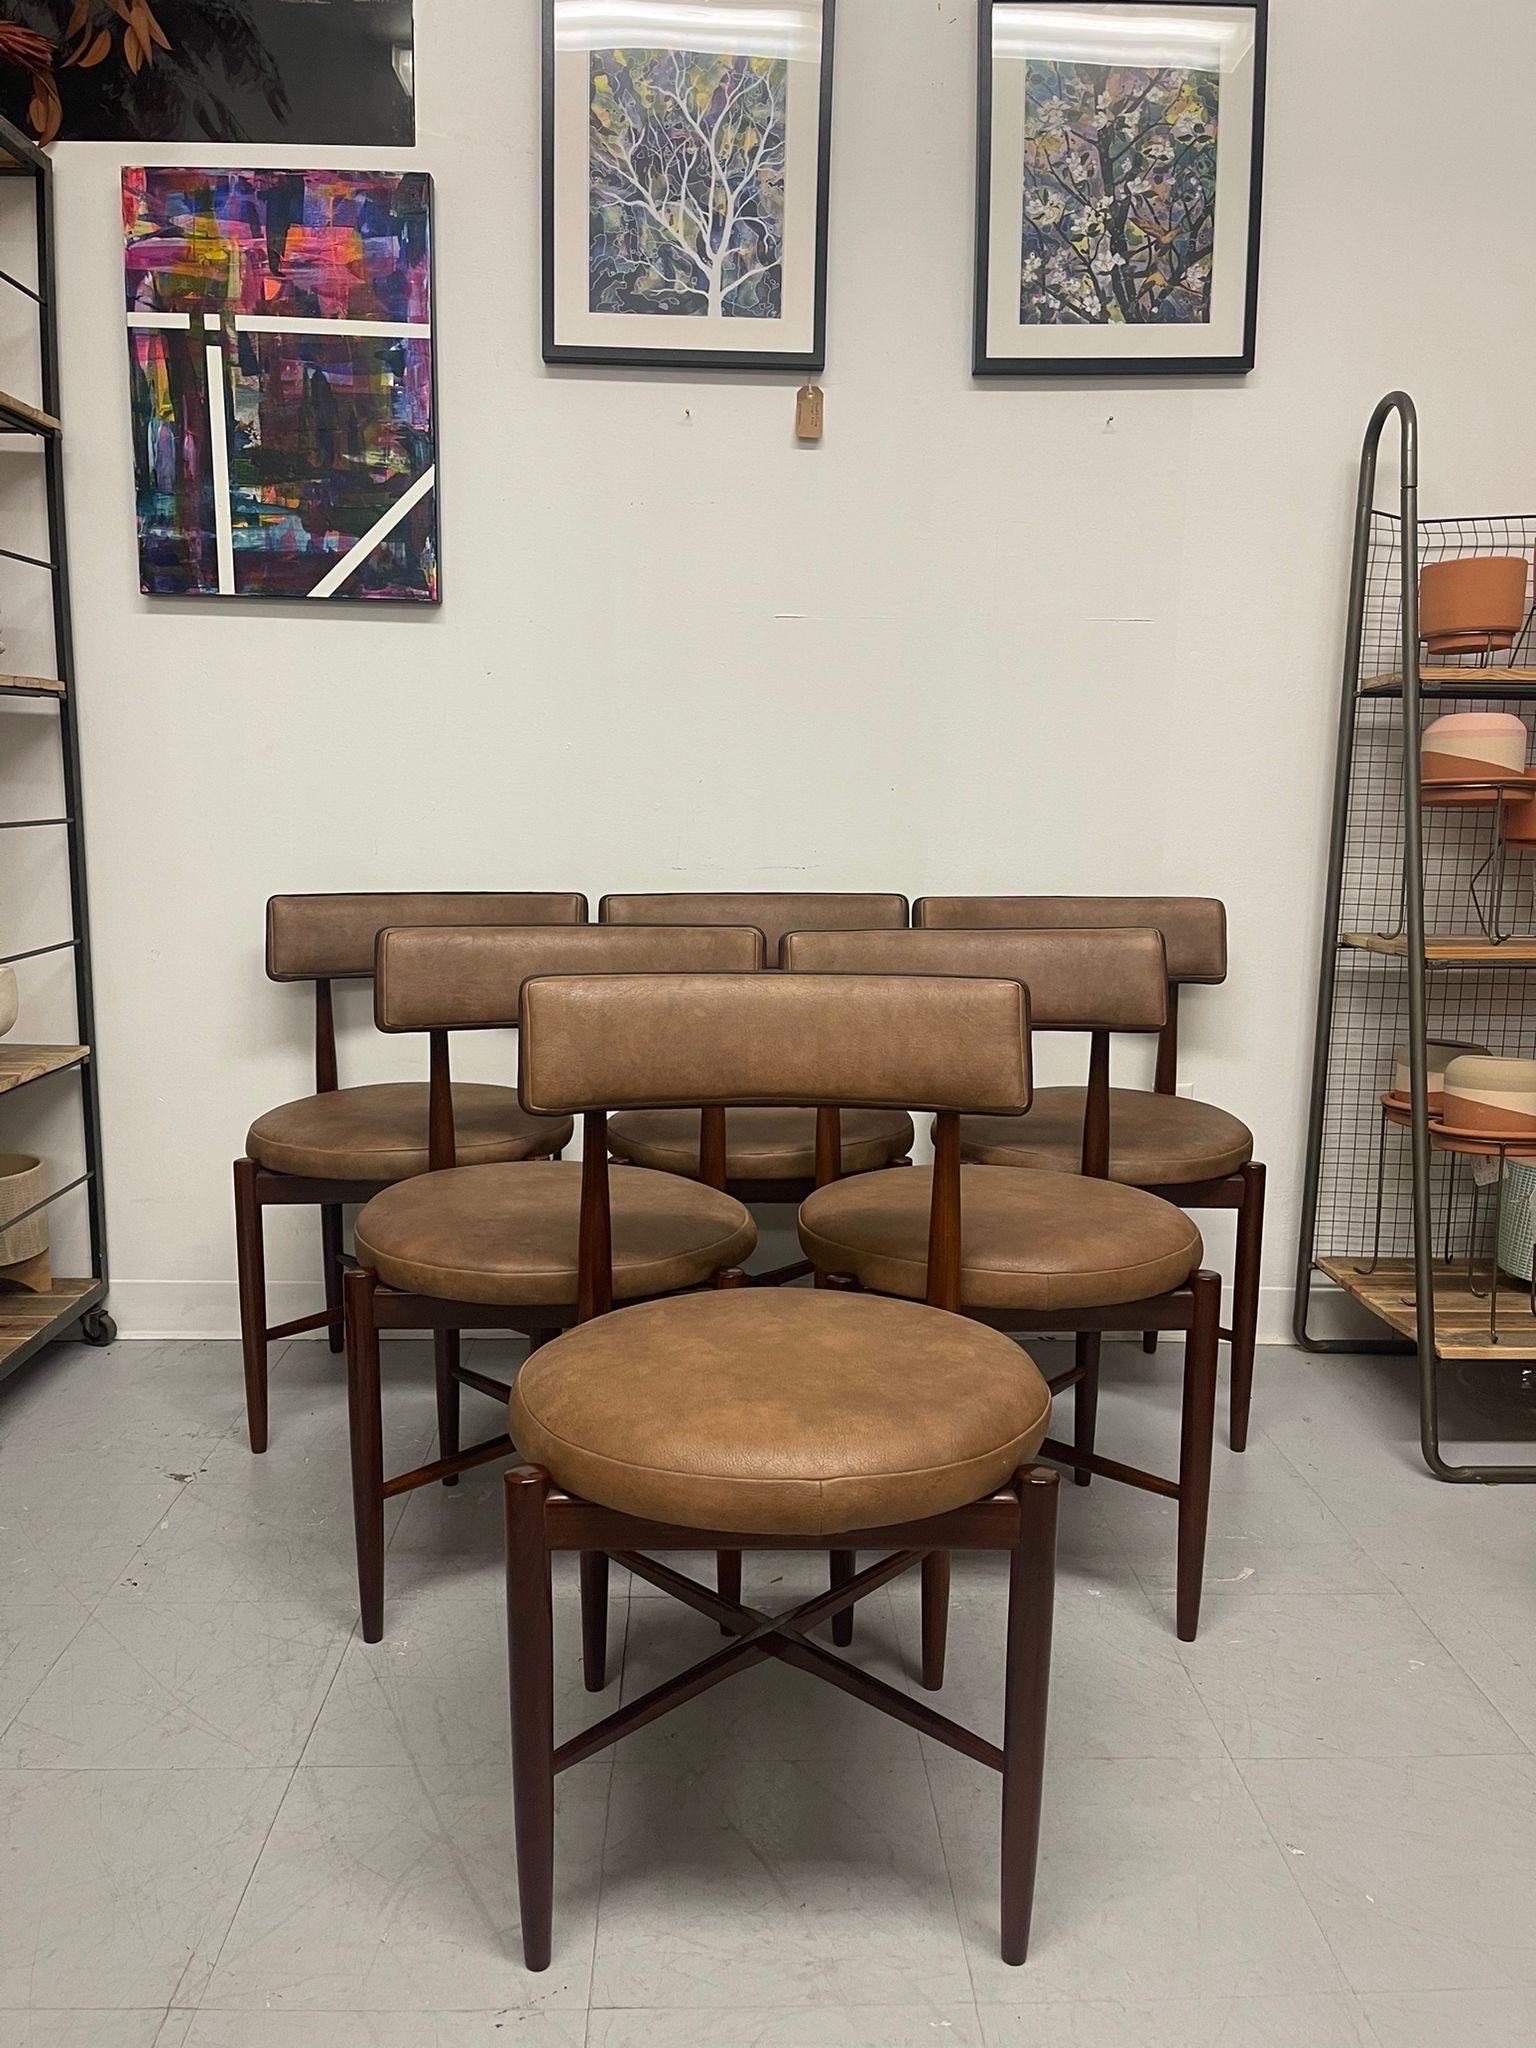 Recent UK Import. Circa 1960s/1970s. Set of 6 Vintage Chairs with Light Brown Seat Cushioning. Possibly Teak or Walnut Wood Based on Maker. Classic G-Plan Design with Tapered Legs and X Reinforcement on the Legs. Vintage Condition Consistent with